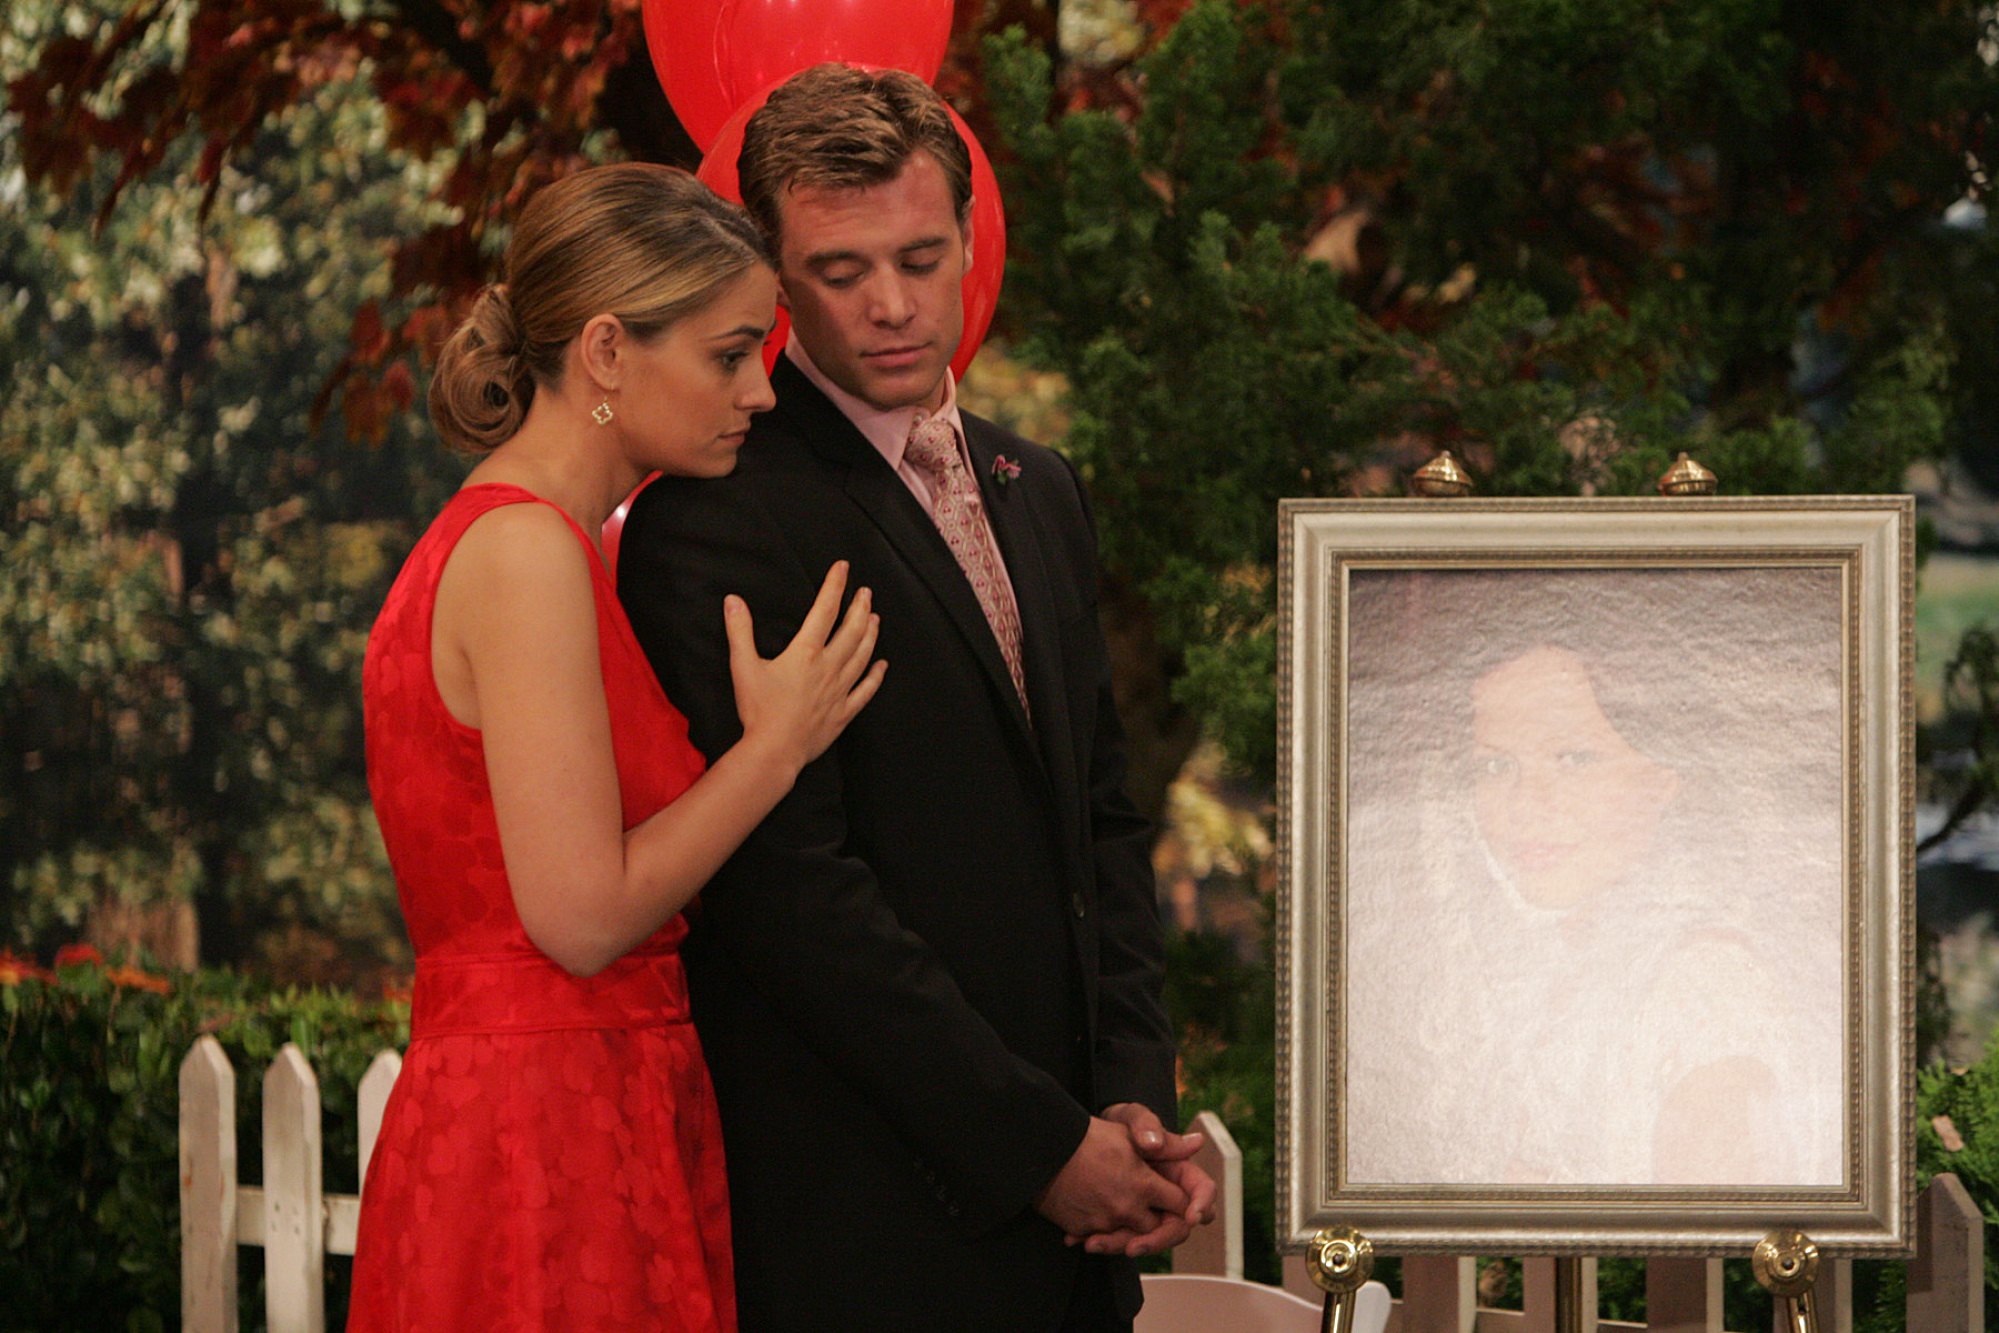 Clementine Ford and Billy Miller in an episode of "The Young and the Restless" in 2009 | Source: Getty Images